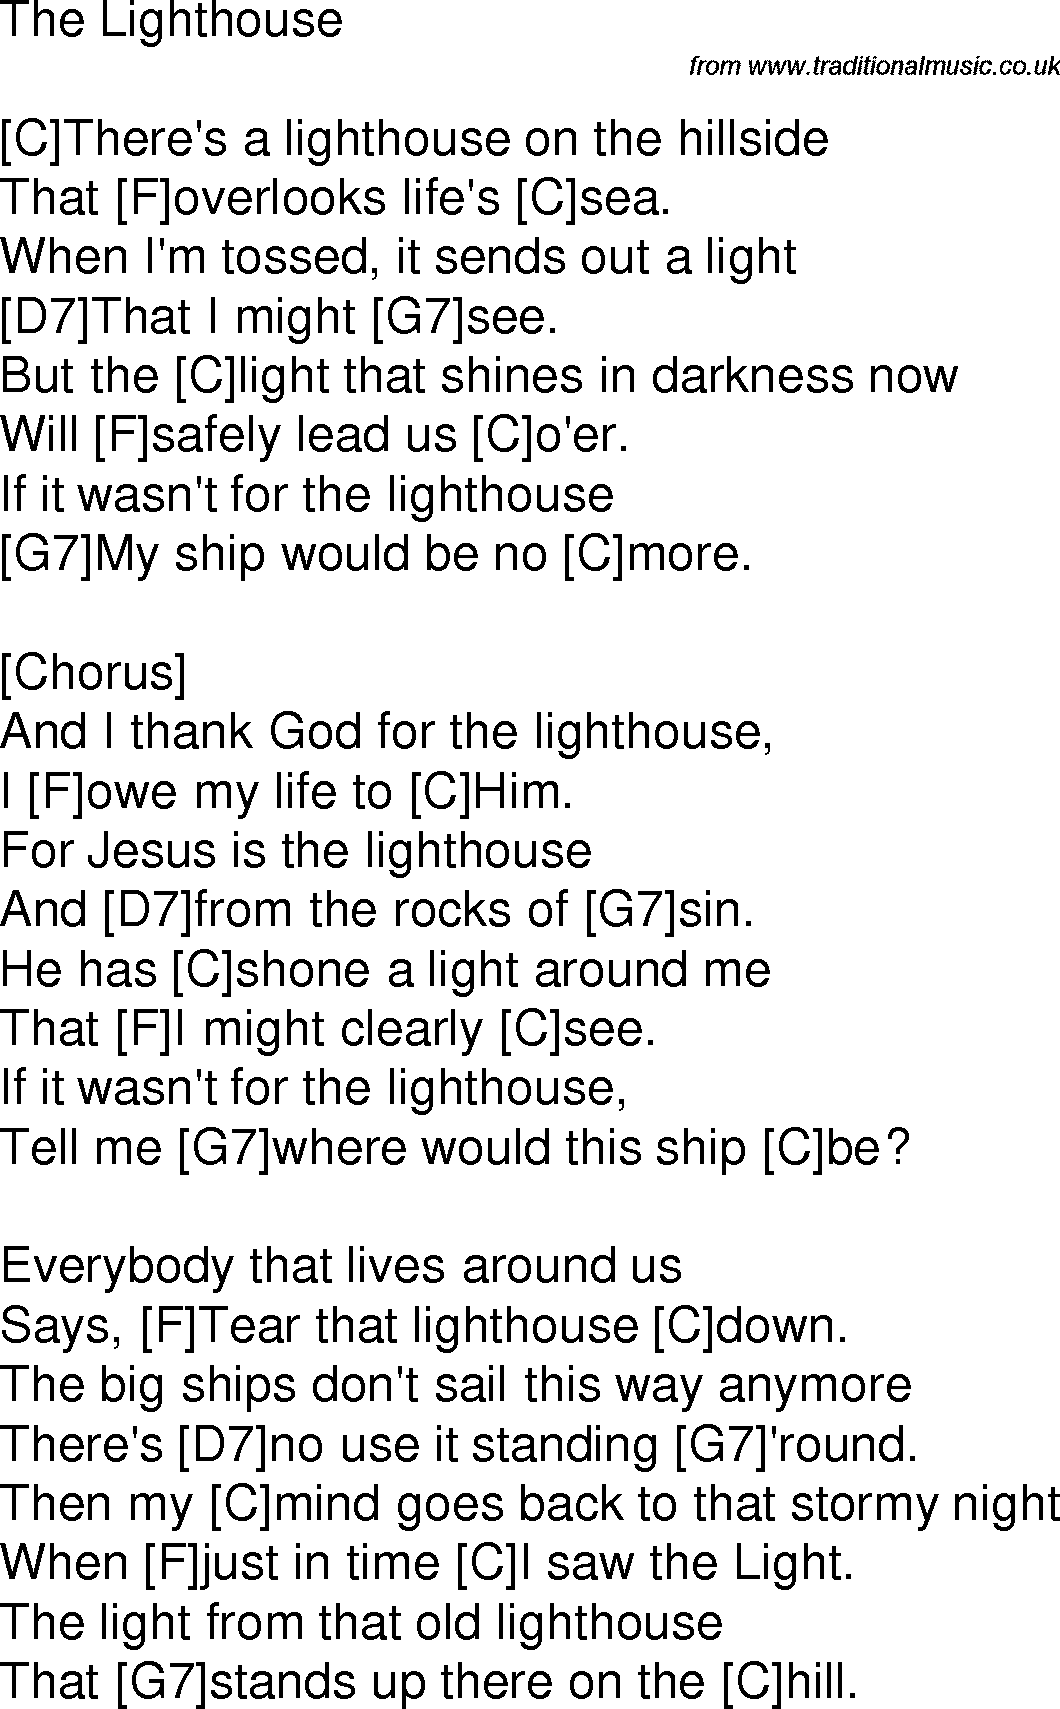 Old time song lyrics with chords for The Lighthouse C